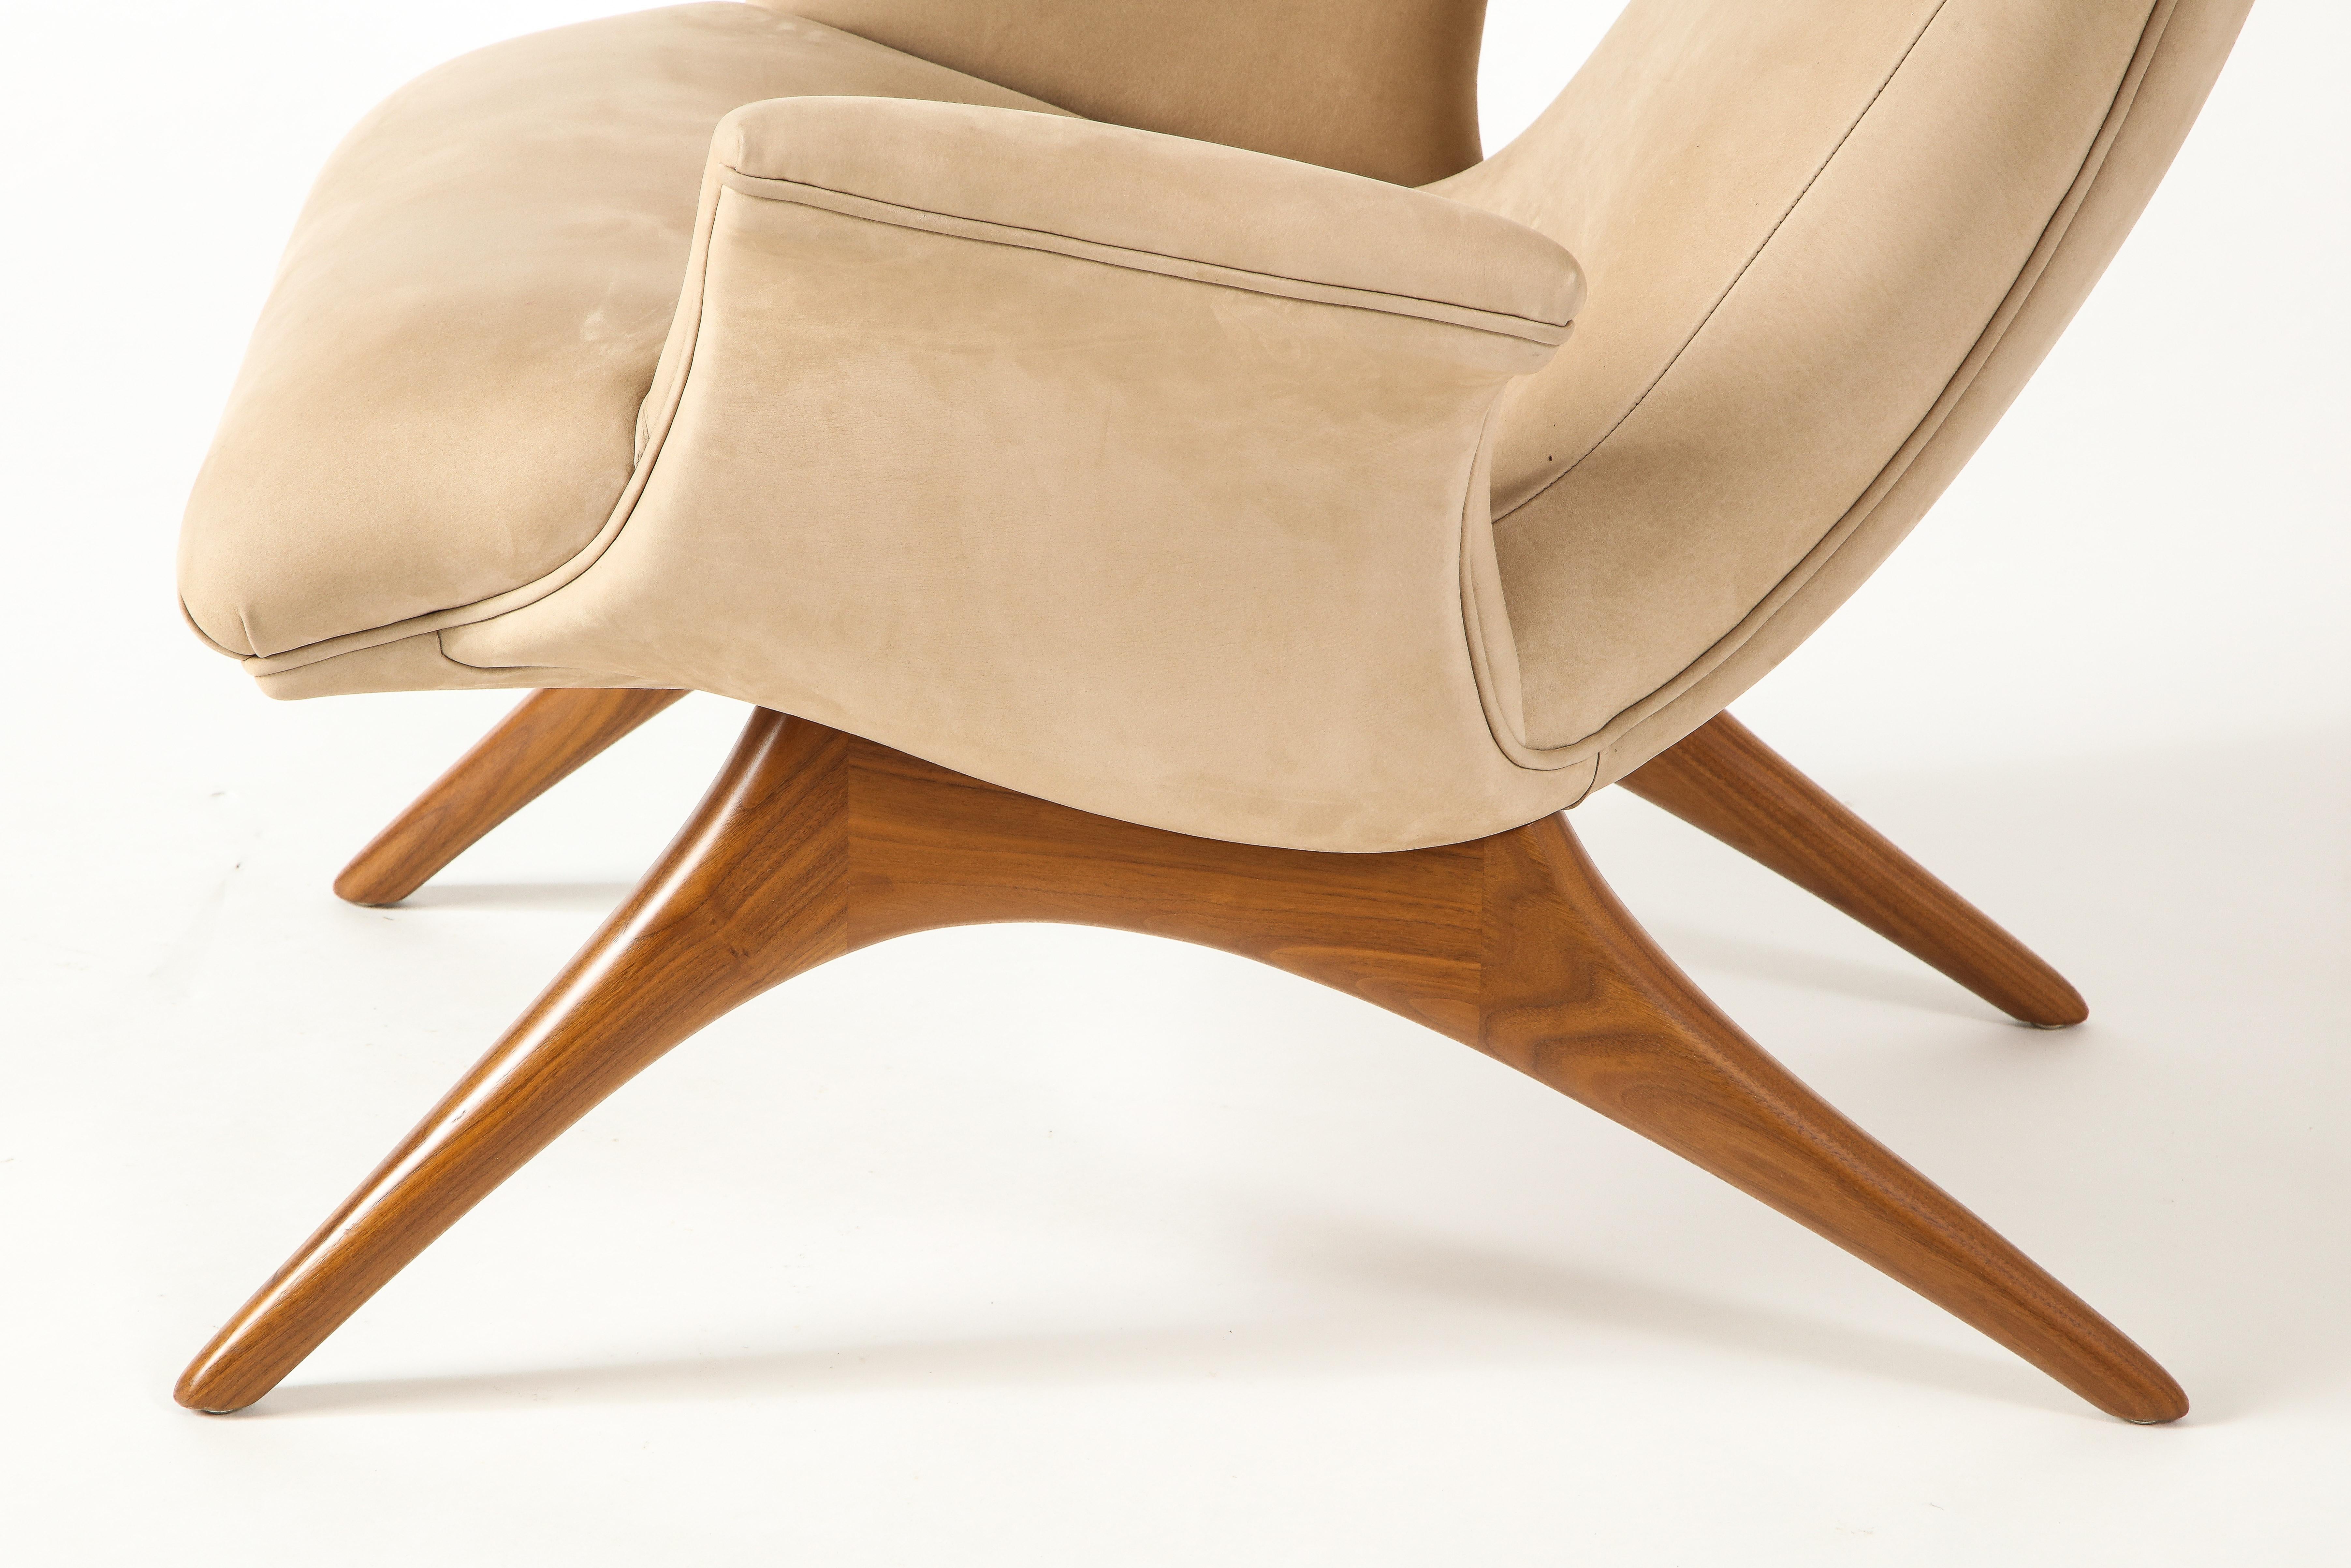 Contemporary Vladimir Kagan Ondine Chair with Sueded Leather Upholstery & Natural Walnut Base